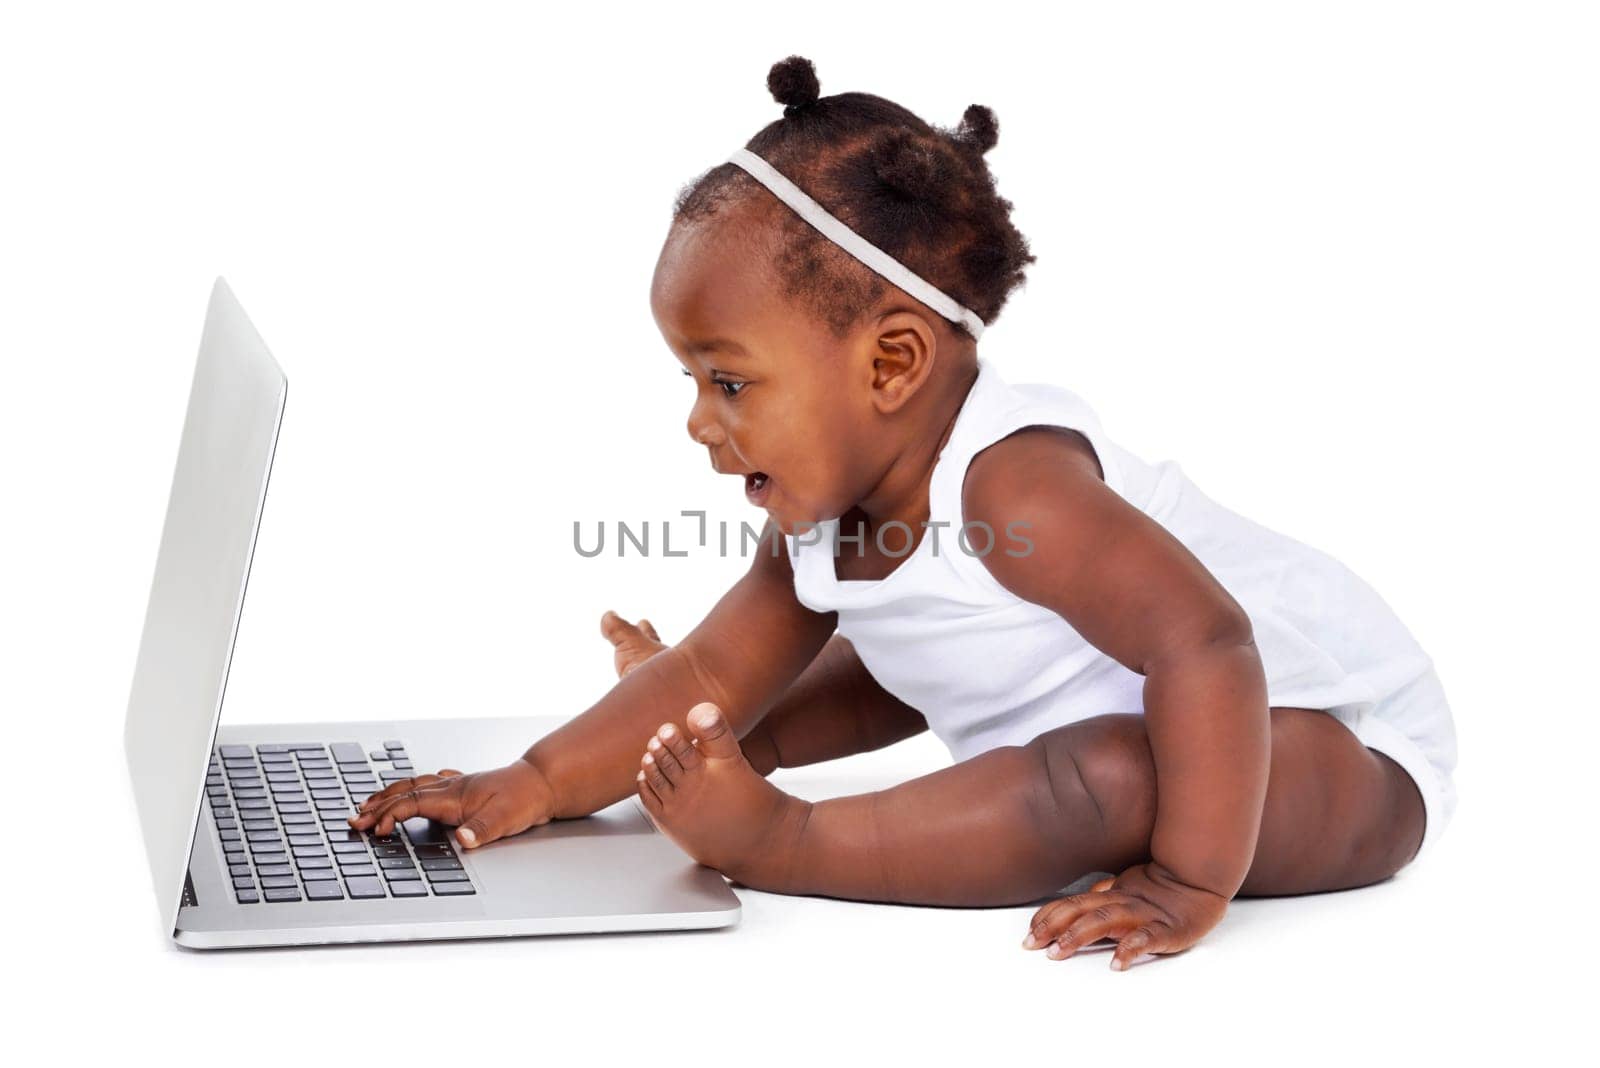 African baby in studio with laptop on white background for learning, development or growth or milestones with computer. Girl, backdrop or technology, curious or childhood education or formation.